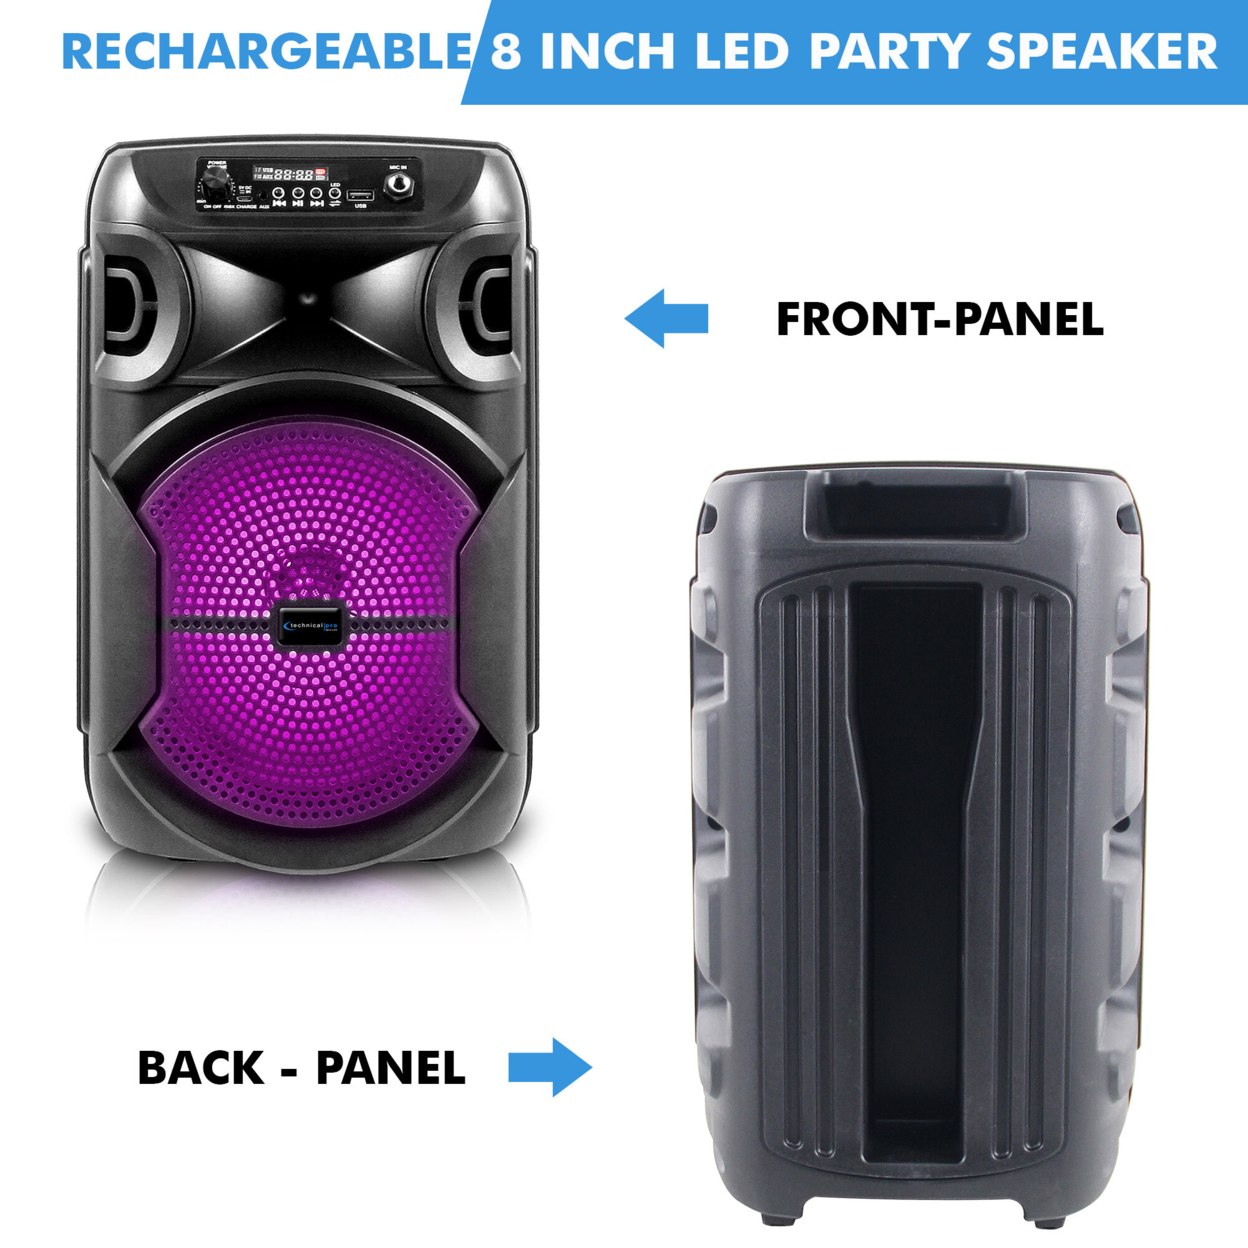 2 Set Technical Pro 8 Inch Portable 1000 watts Bluetooth Speaker w/ Woofer and Tweeter Party PA LED Speaker w/ - image 3 of 7